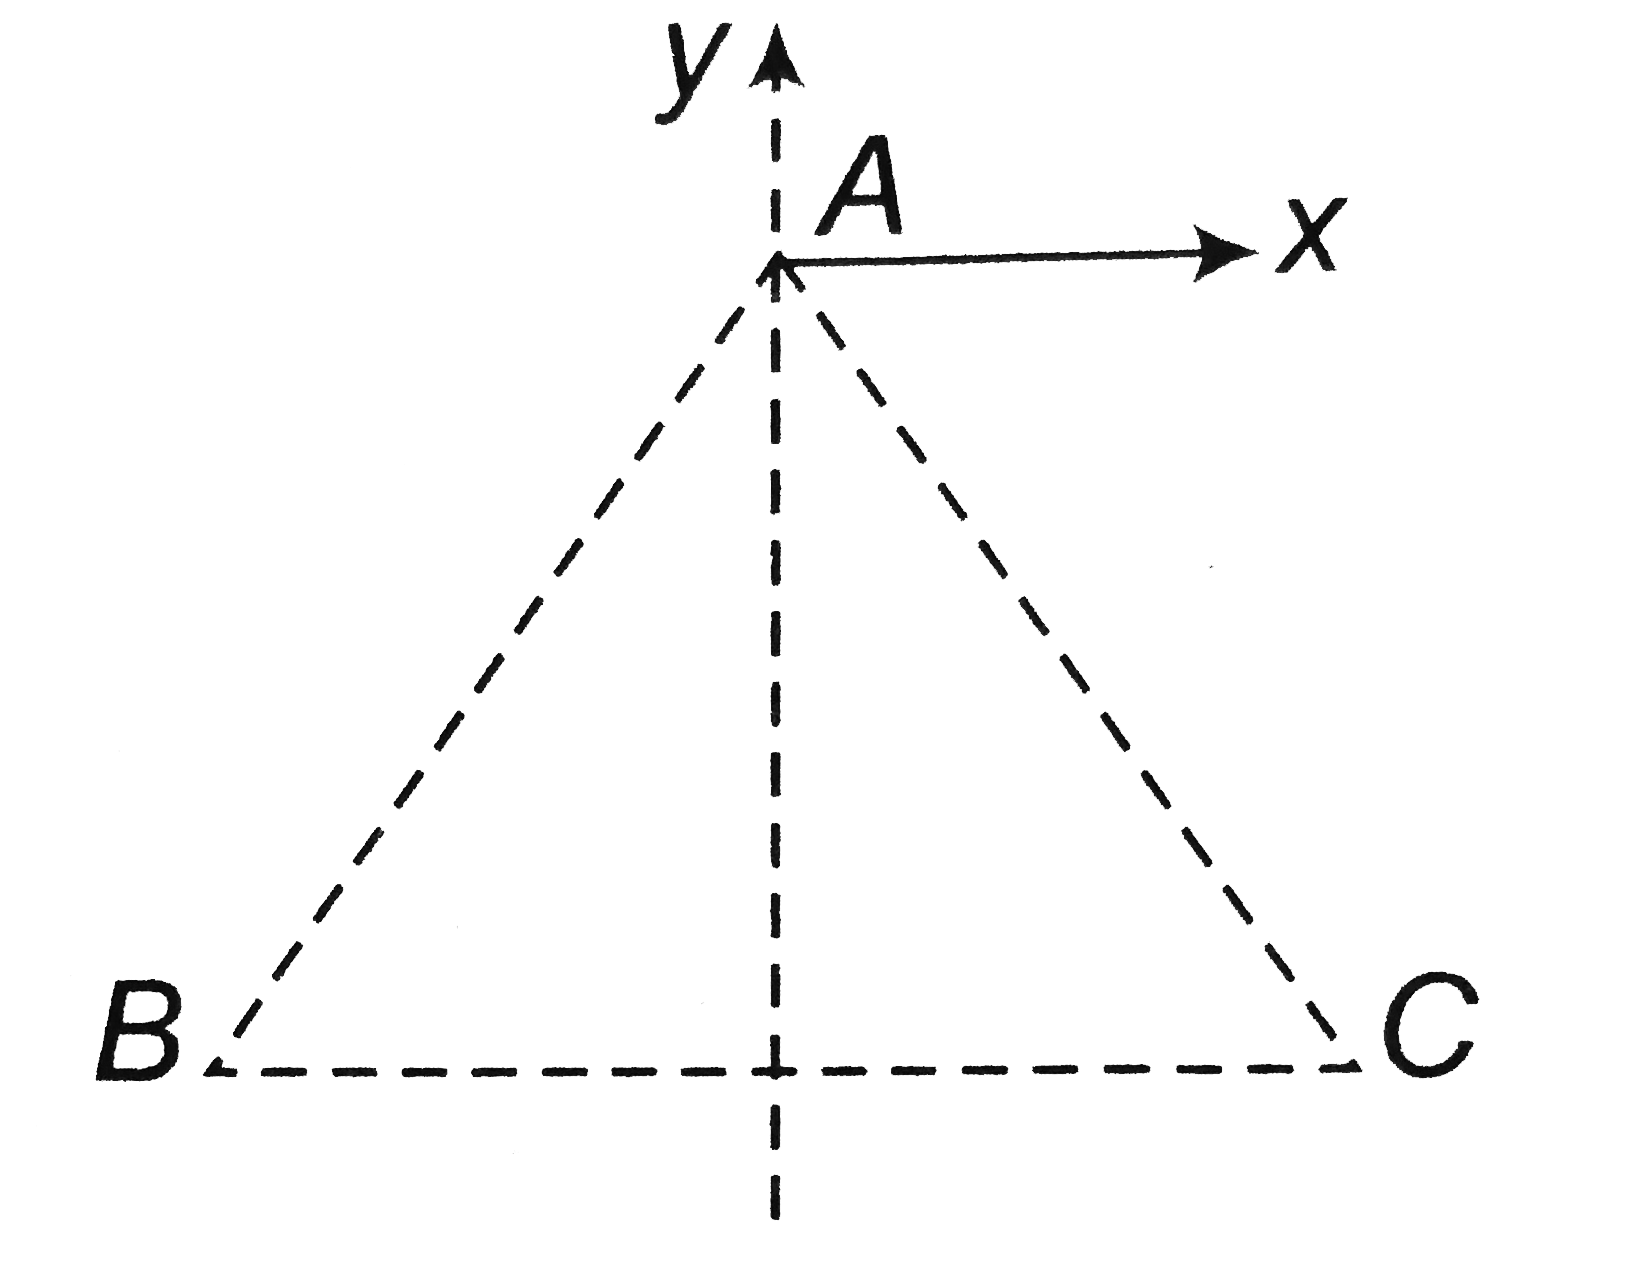 Three similar charges +q are placed on 3 corners of an equilateral triangle ABC of side a. How many minimum charges should be placed on a circle of radius a with centre at A so that resultant force on the charge placed at the centre is (q^(2))/(4pi epsilon(0)a^(2)) along x-axis,